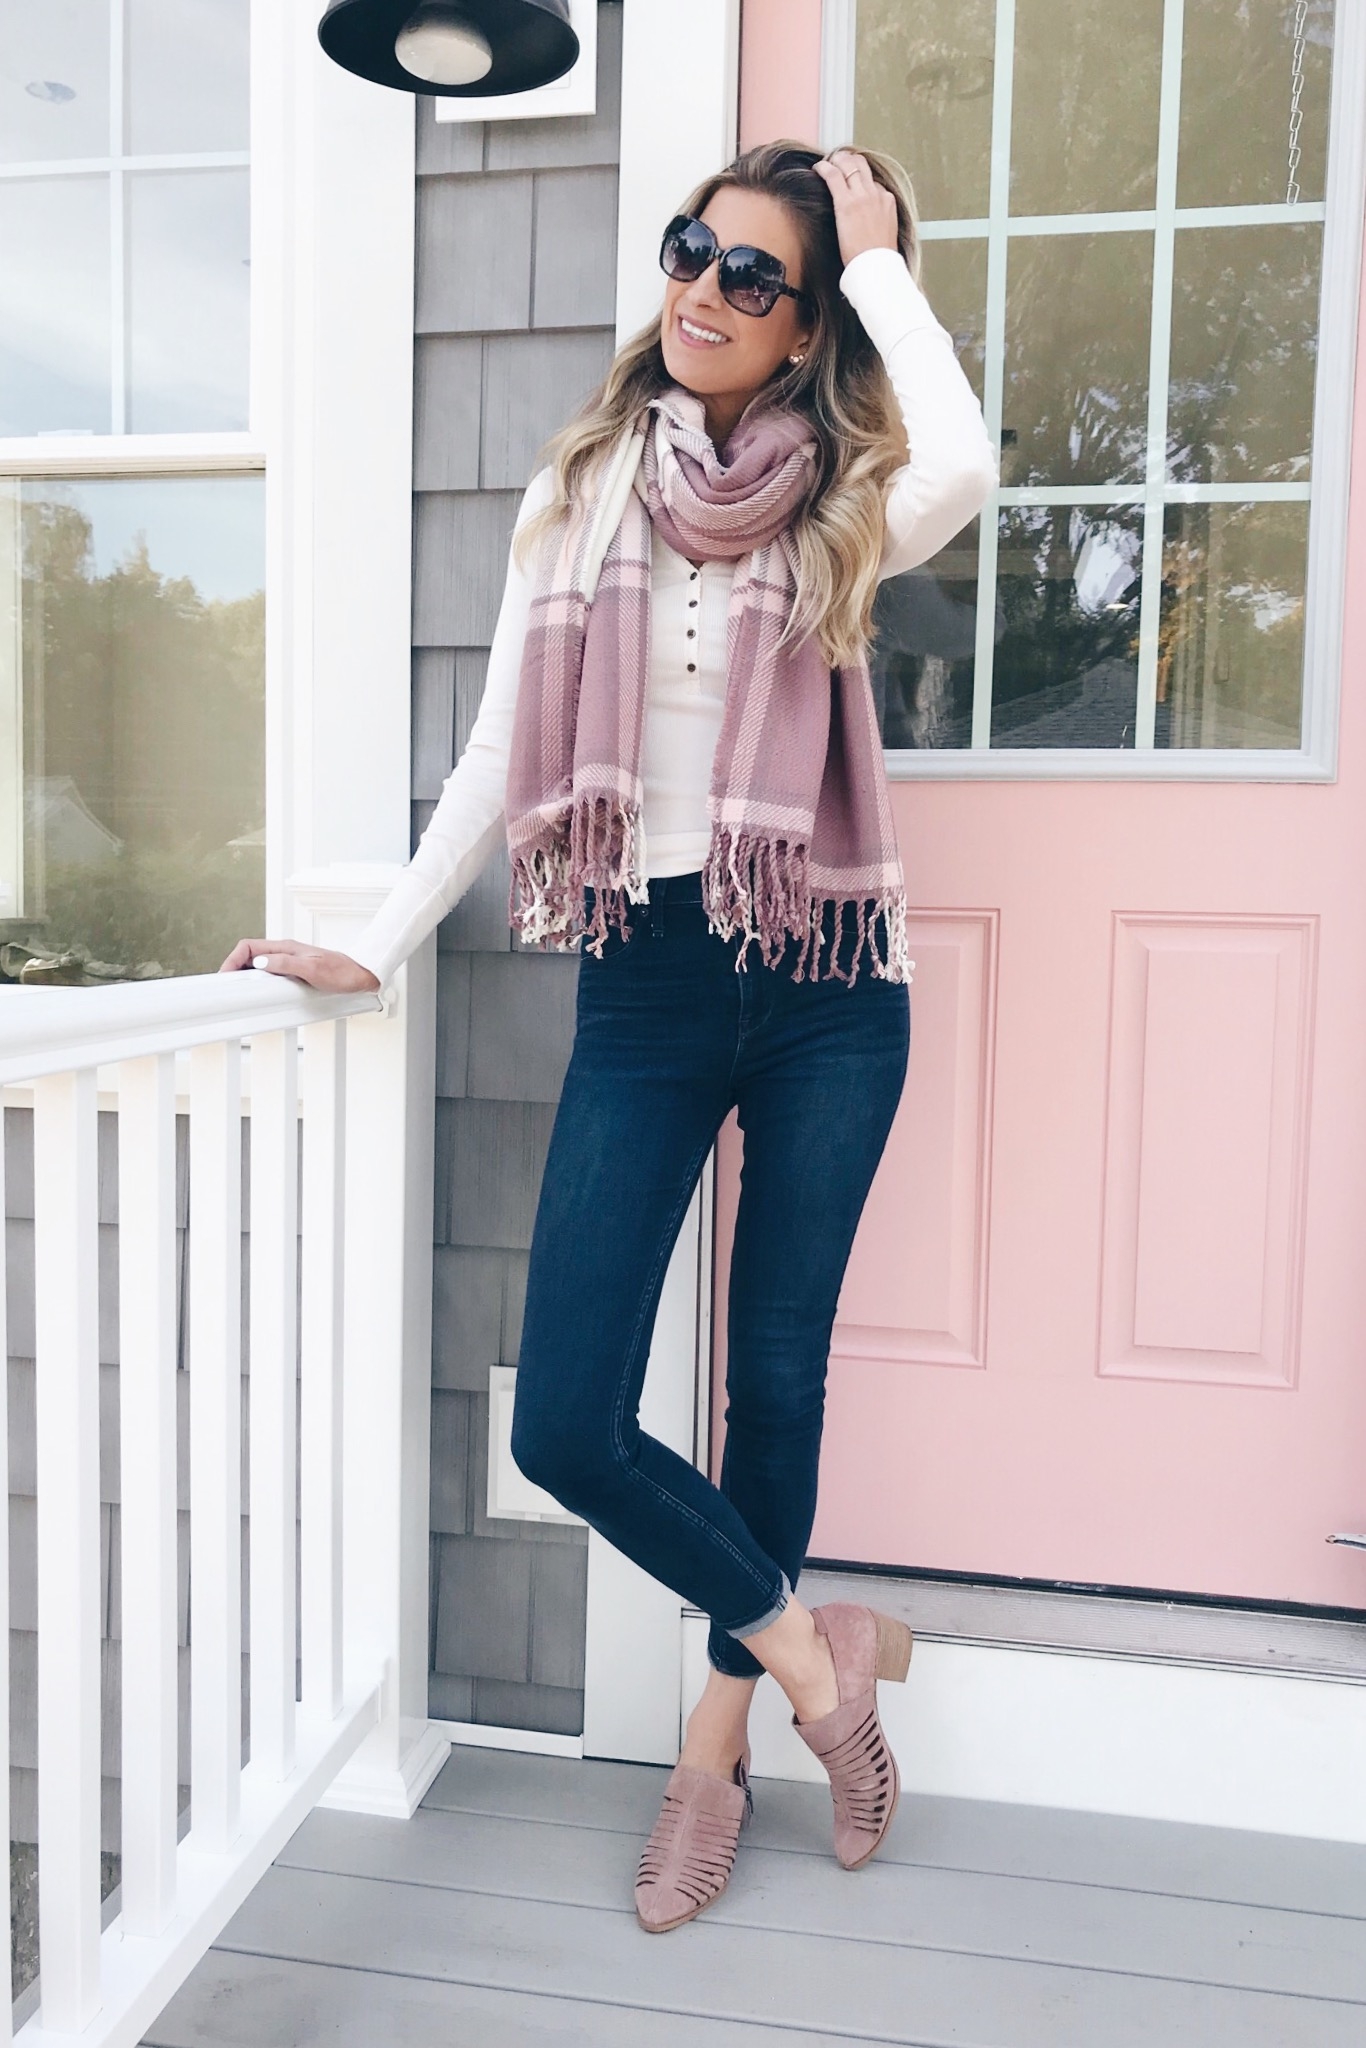 Scarf Outfit Ideas for Fall